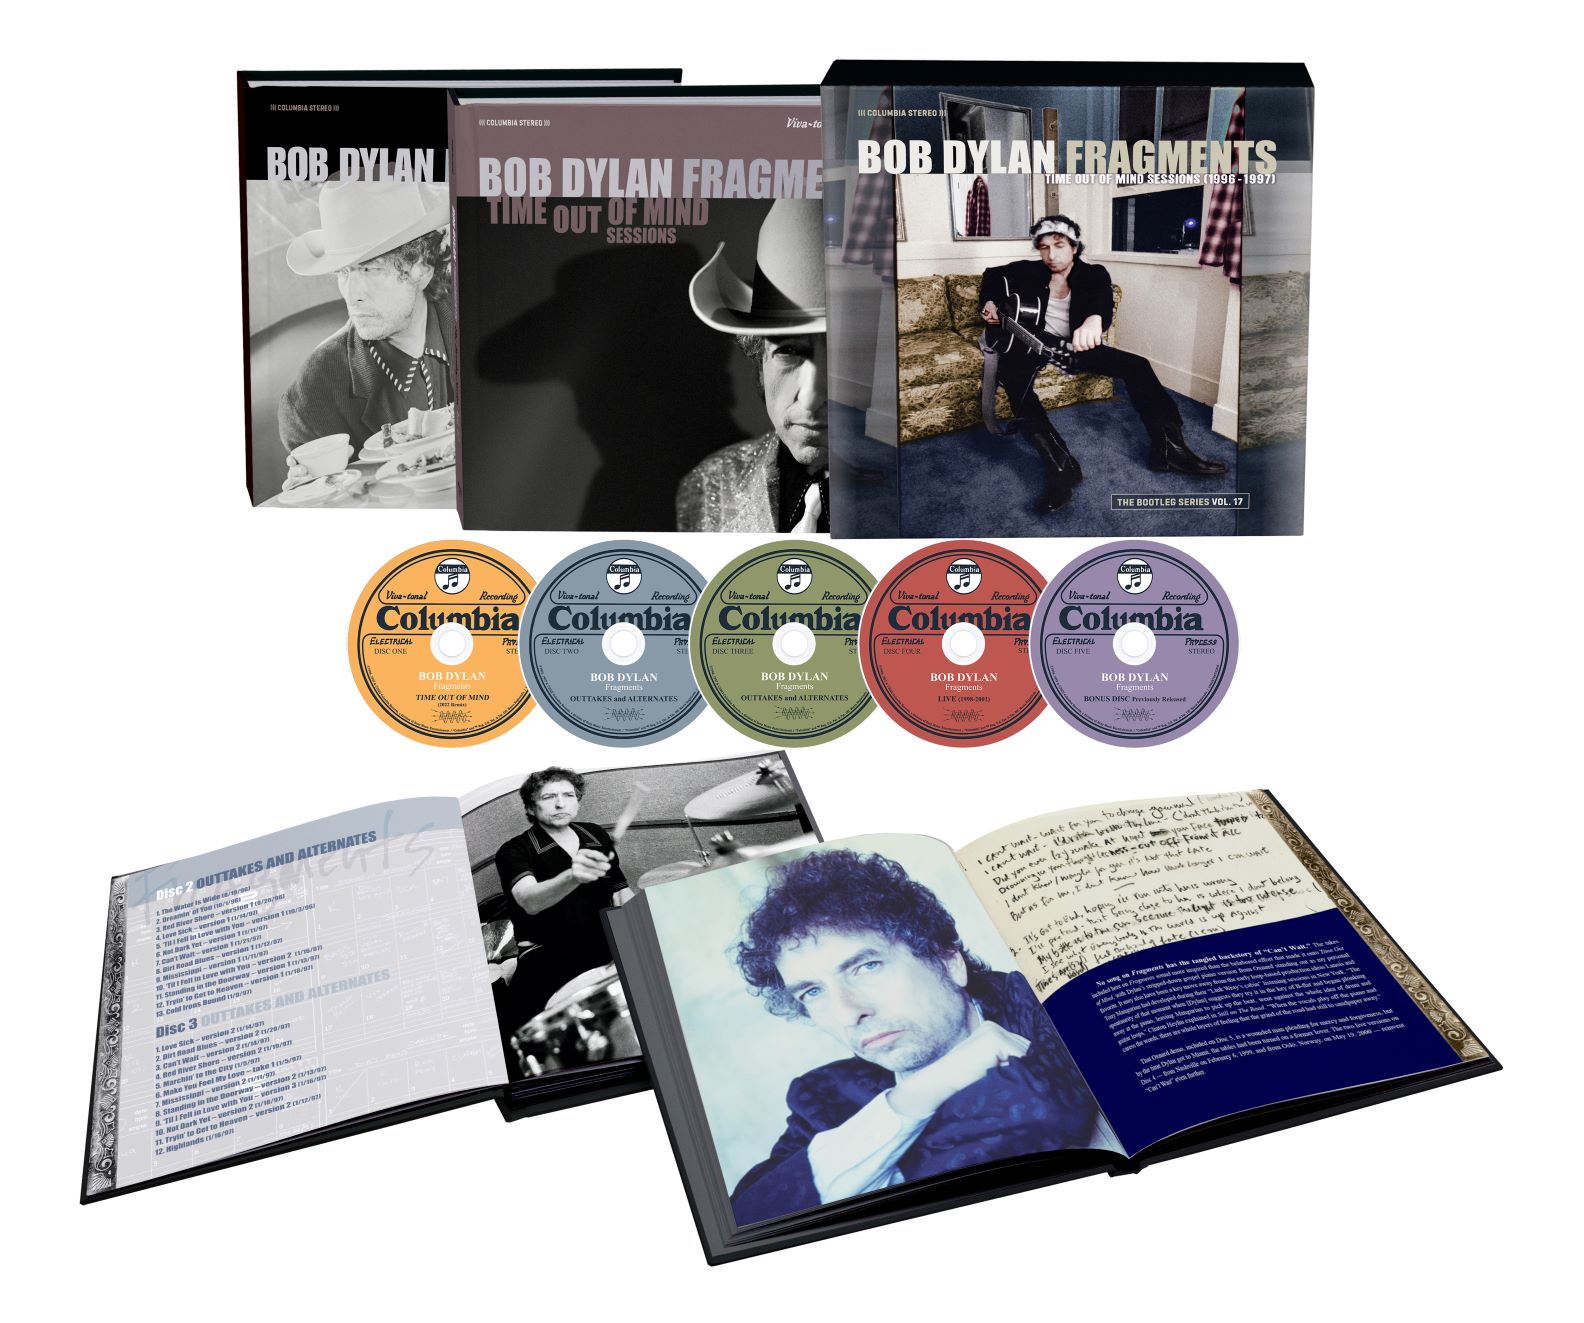 BOB DYLAN / ボブ・ディラン / FRAGMENTS - TIME OUT OF MIND SESSIONS (1996-1997): THE BOOTLEG SERIES VOL. 17 (5CD)